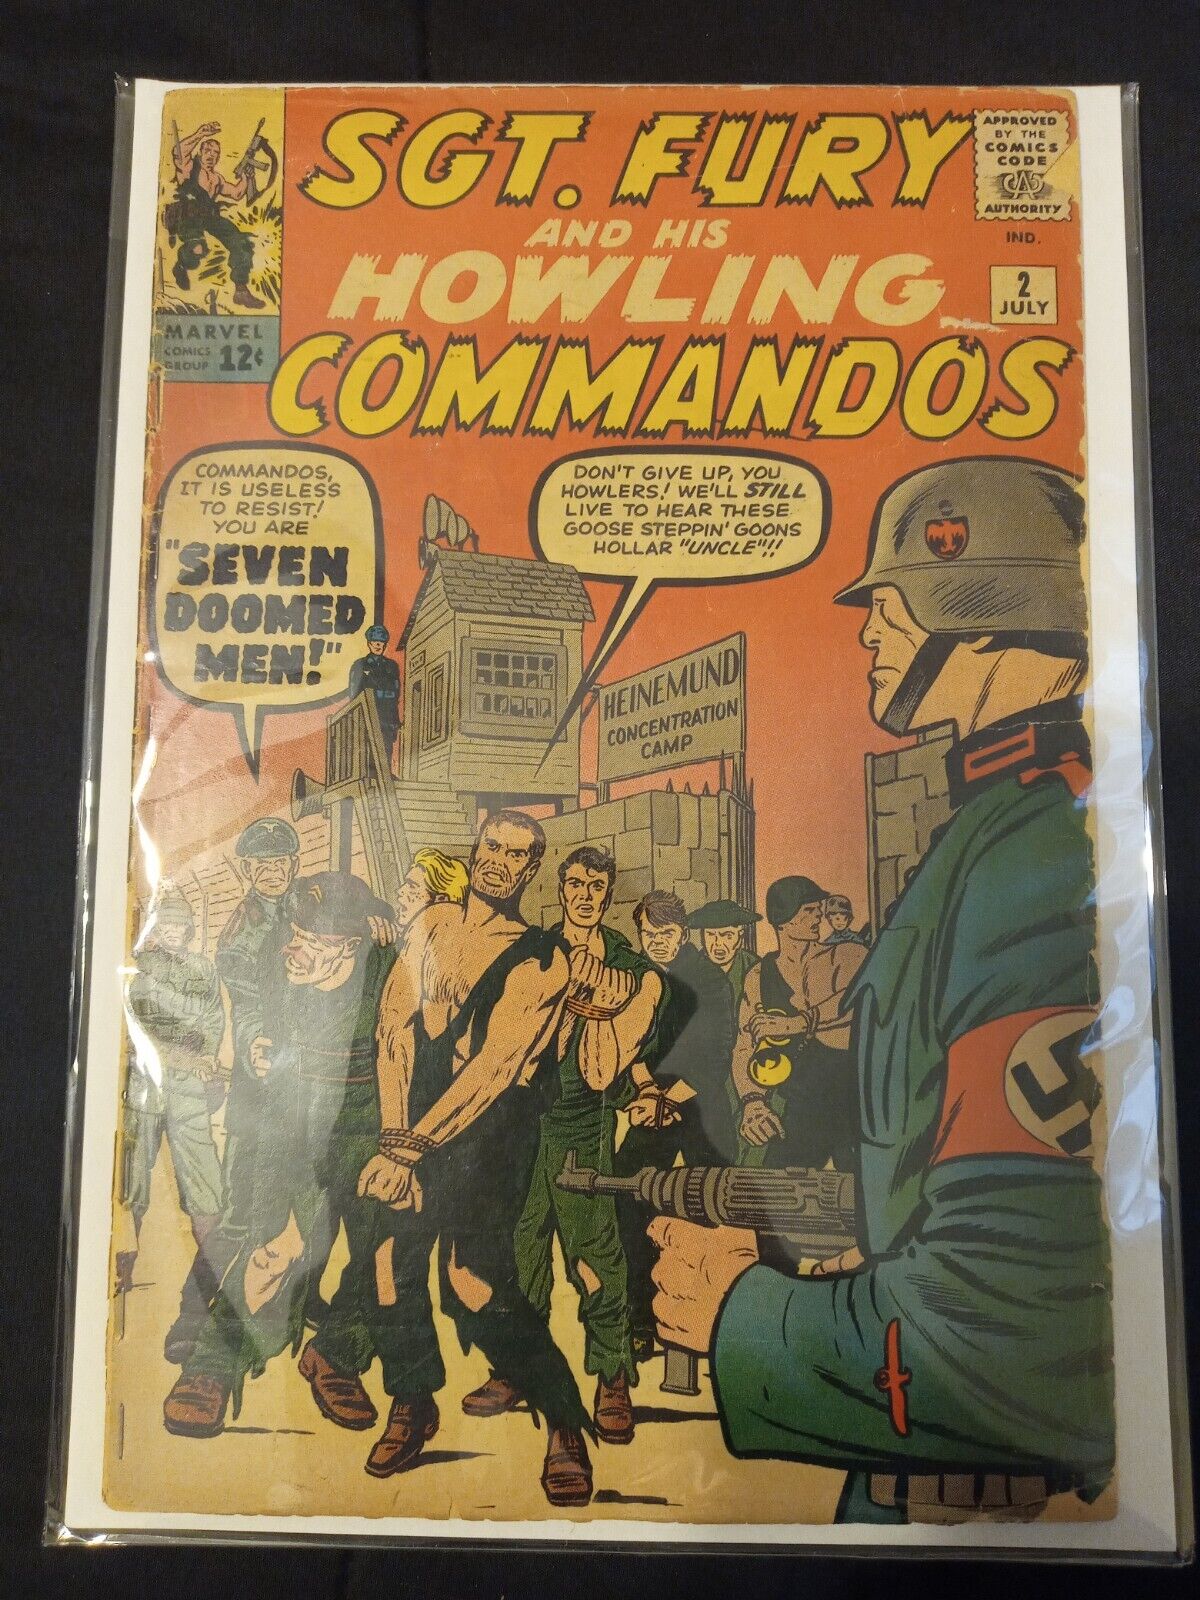 sgt. fury and his howling commandos 2